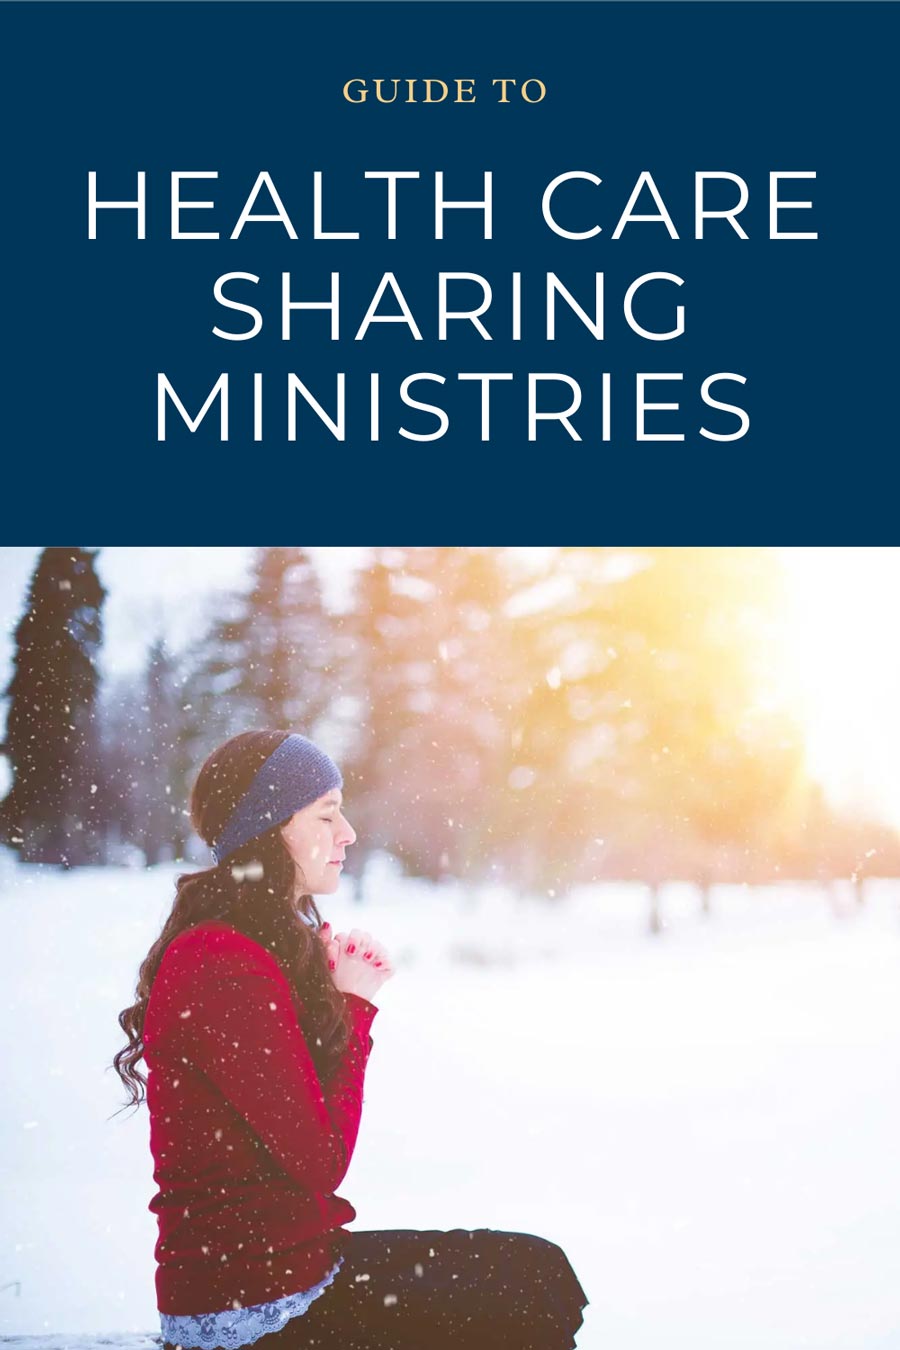 Guide to Health Care Sharing Ministries

